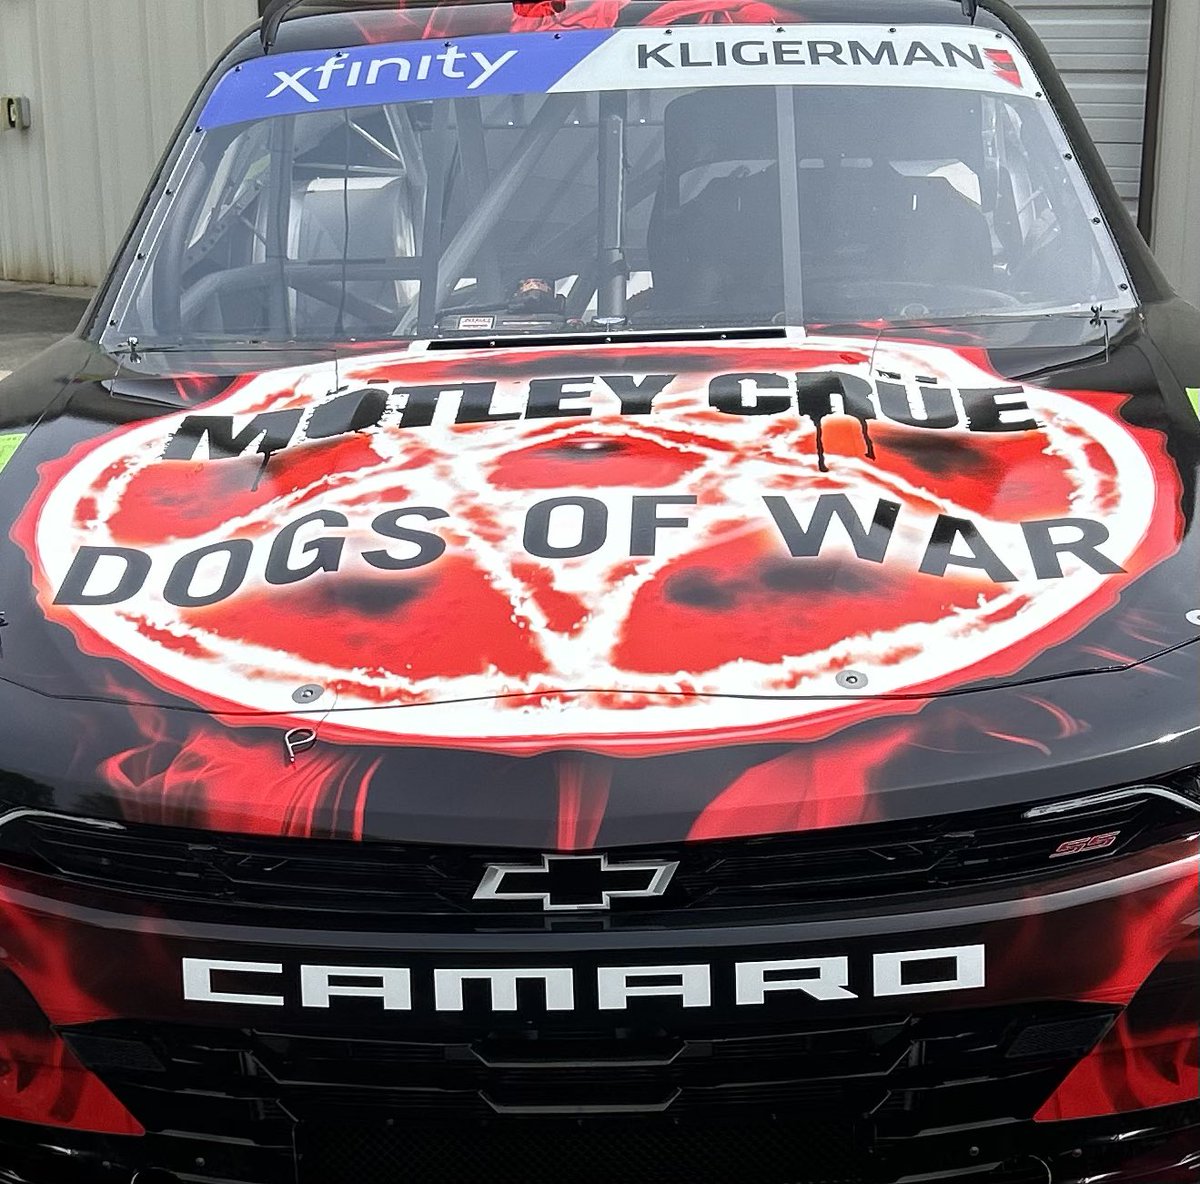 Off to @MonsterMile with the @BigMachine @MotleyCrue “Dogs Of War” Chevy.